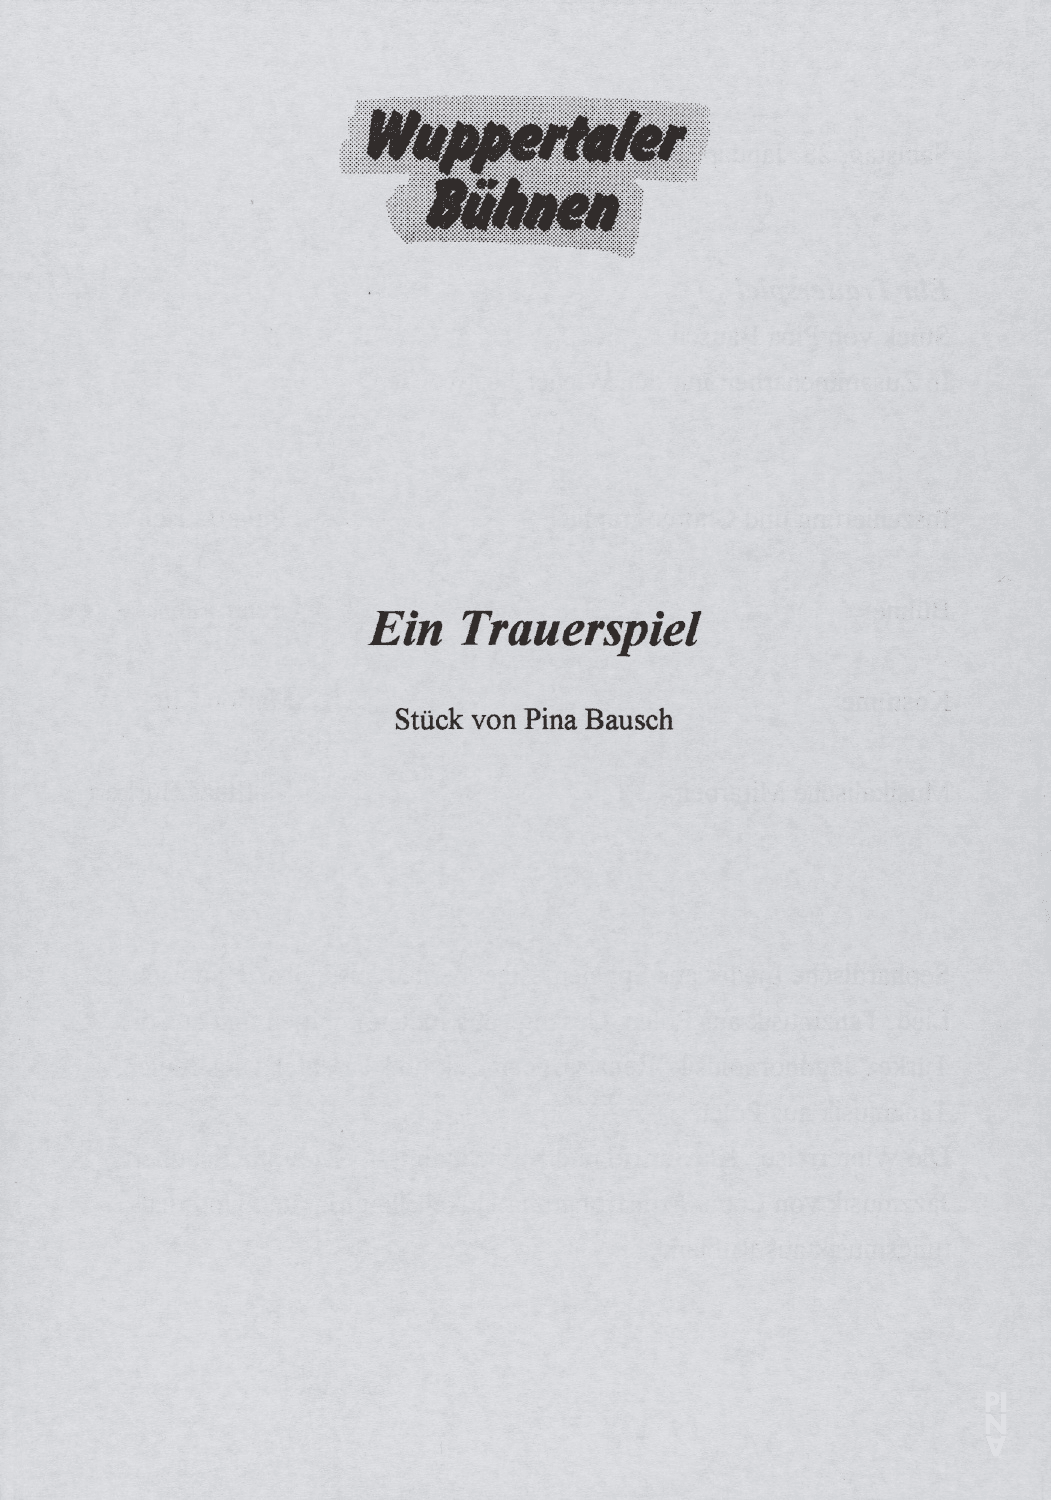 Evening leaflet for “Ein Trauerspiel” by Pina Bausch with Tanztheater Wuppertal in in Wuppertal, 01/28/1995 – 01/29/1995